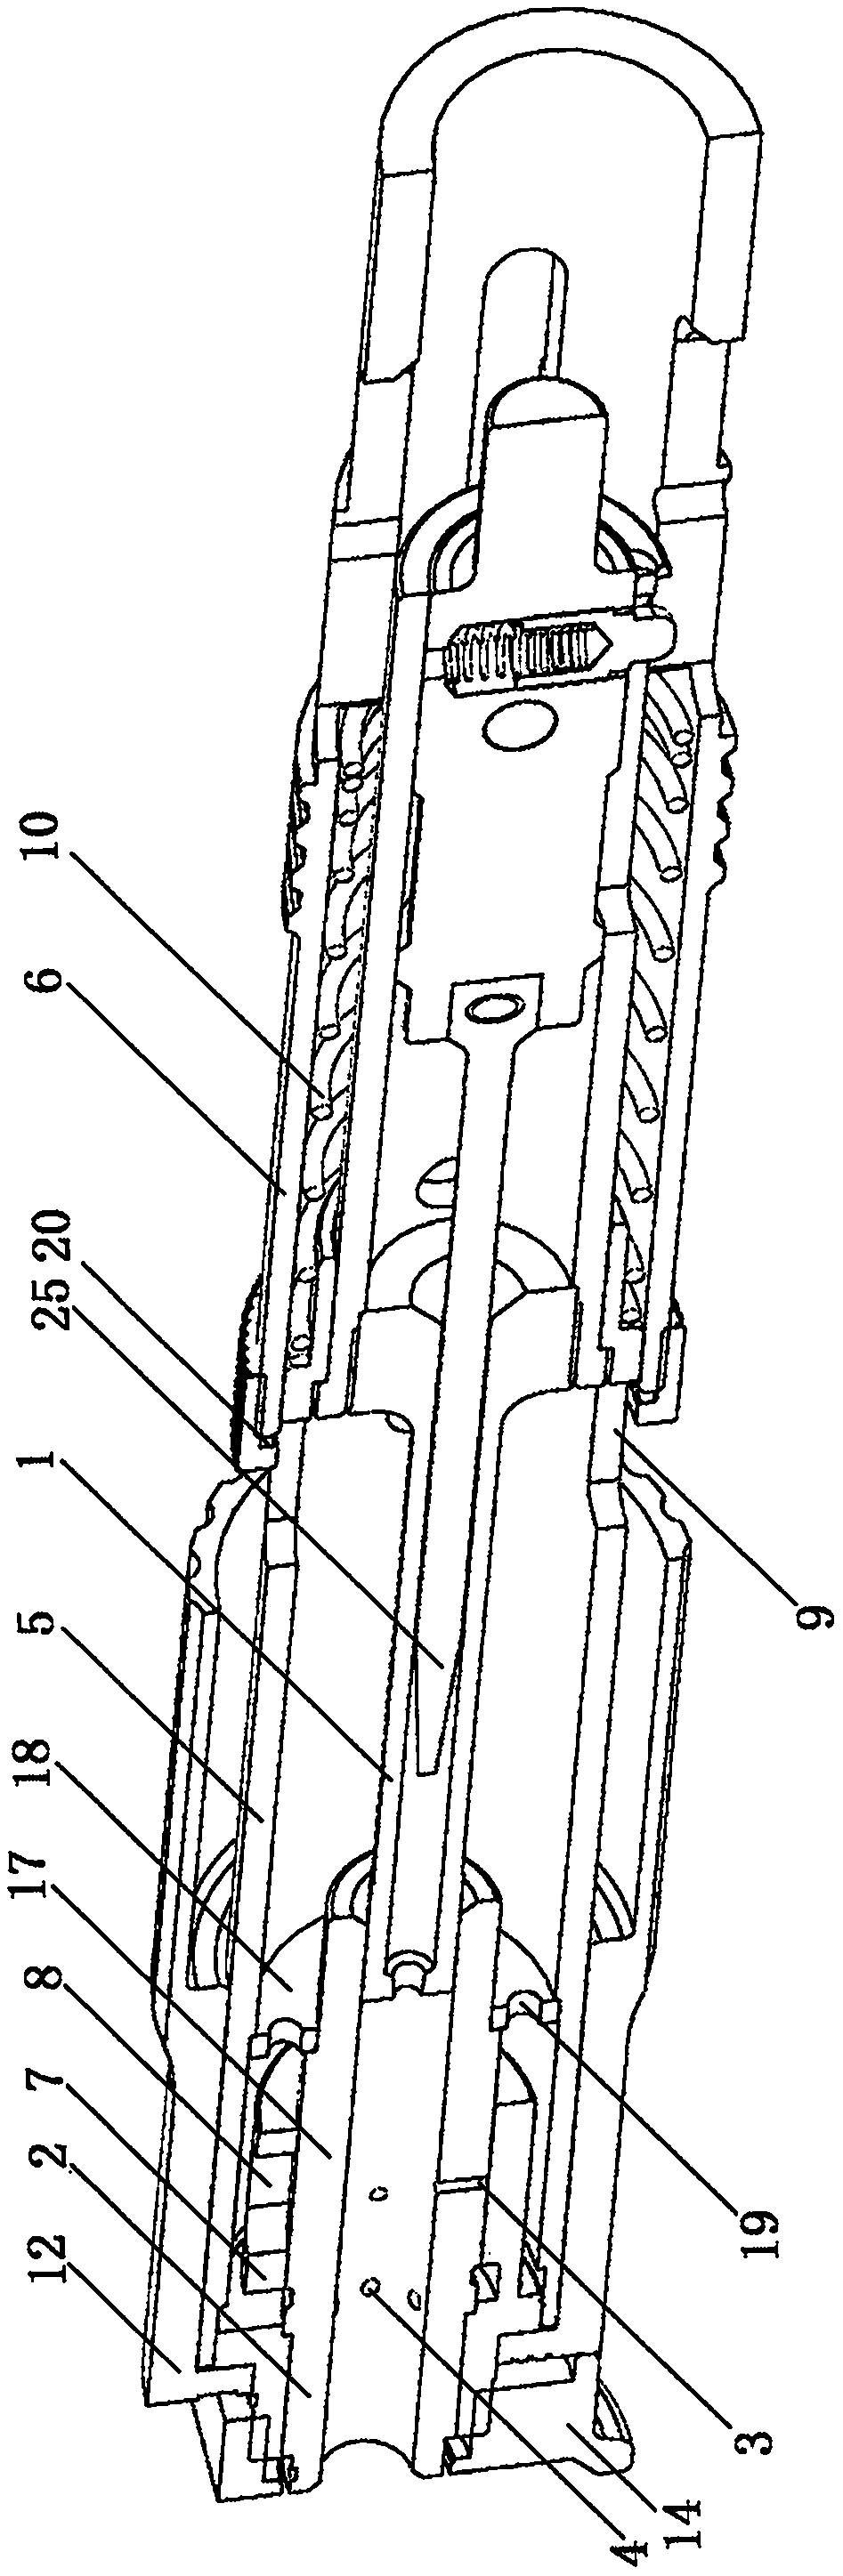 External force adjusting and automatic residue discharging type axial powder actuated tool